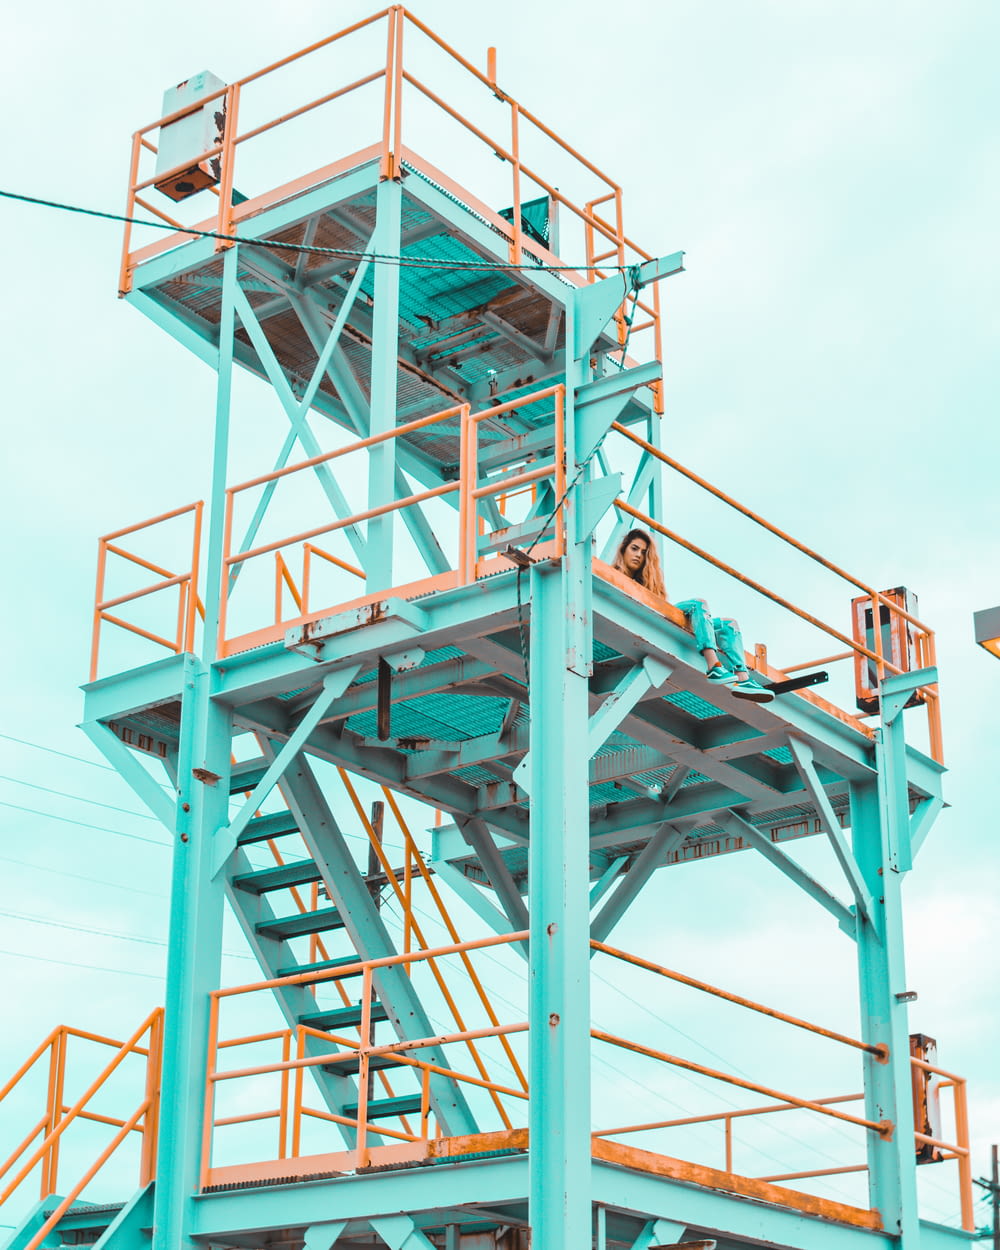 woman sitting on teal and yellow metal tower during daytime